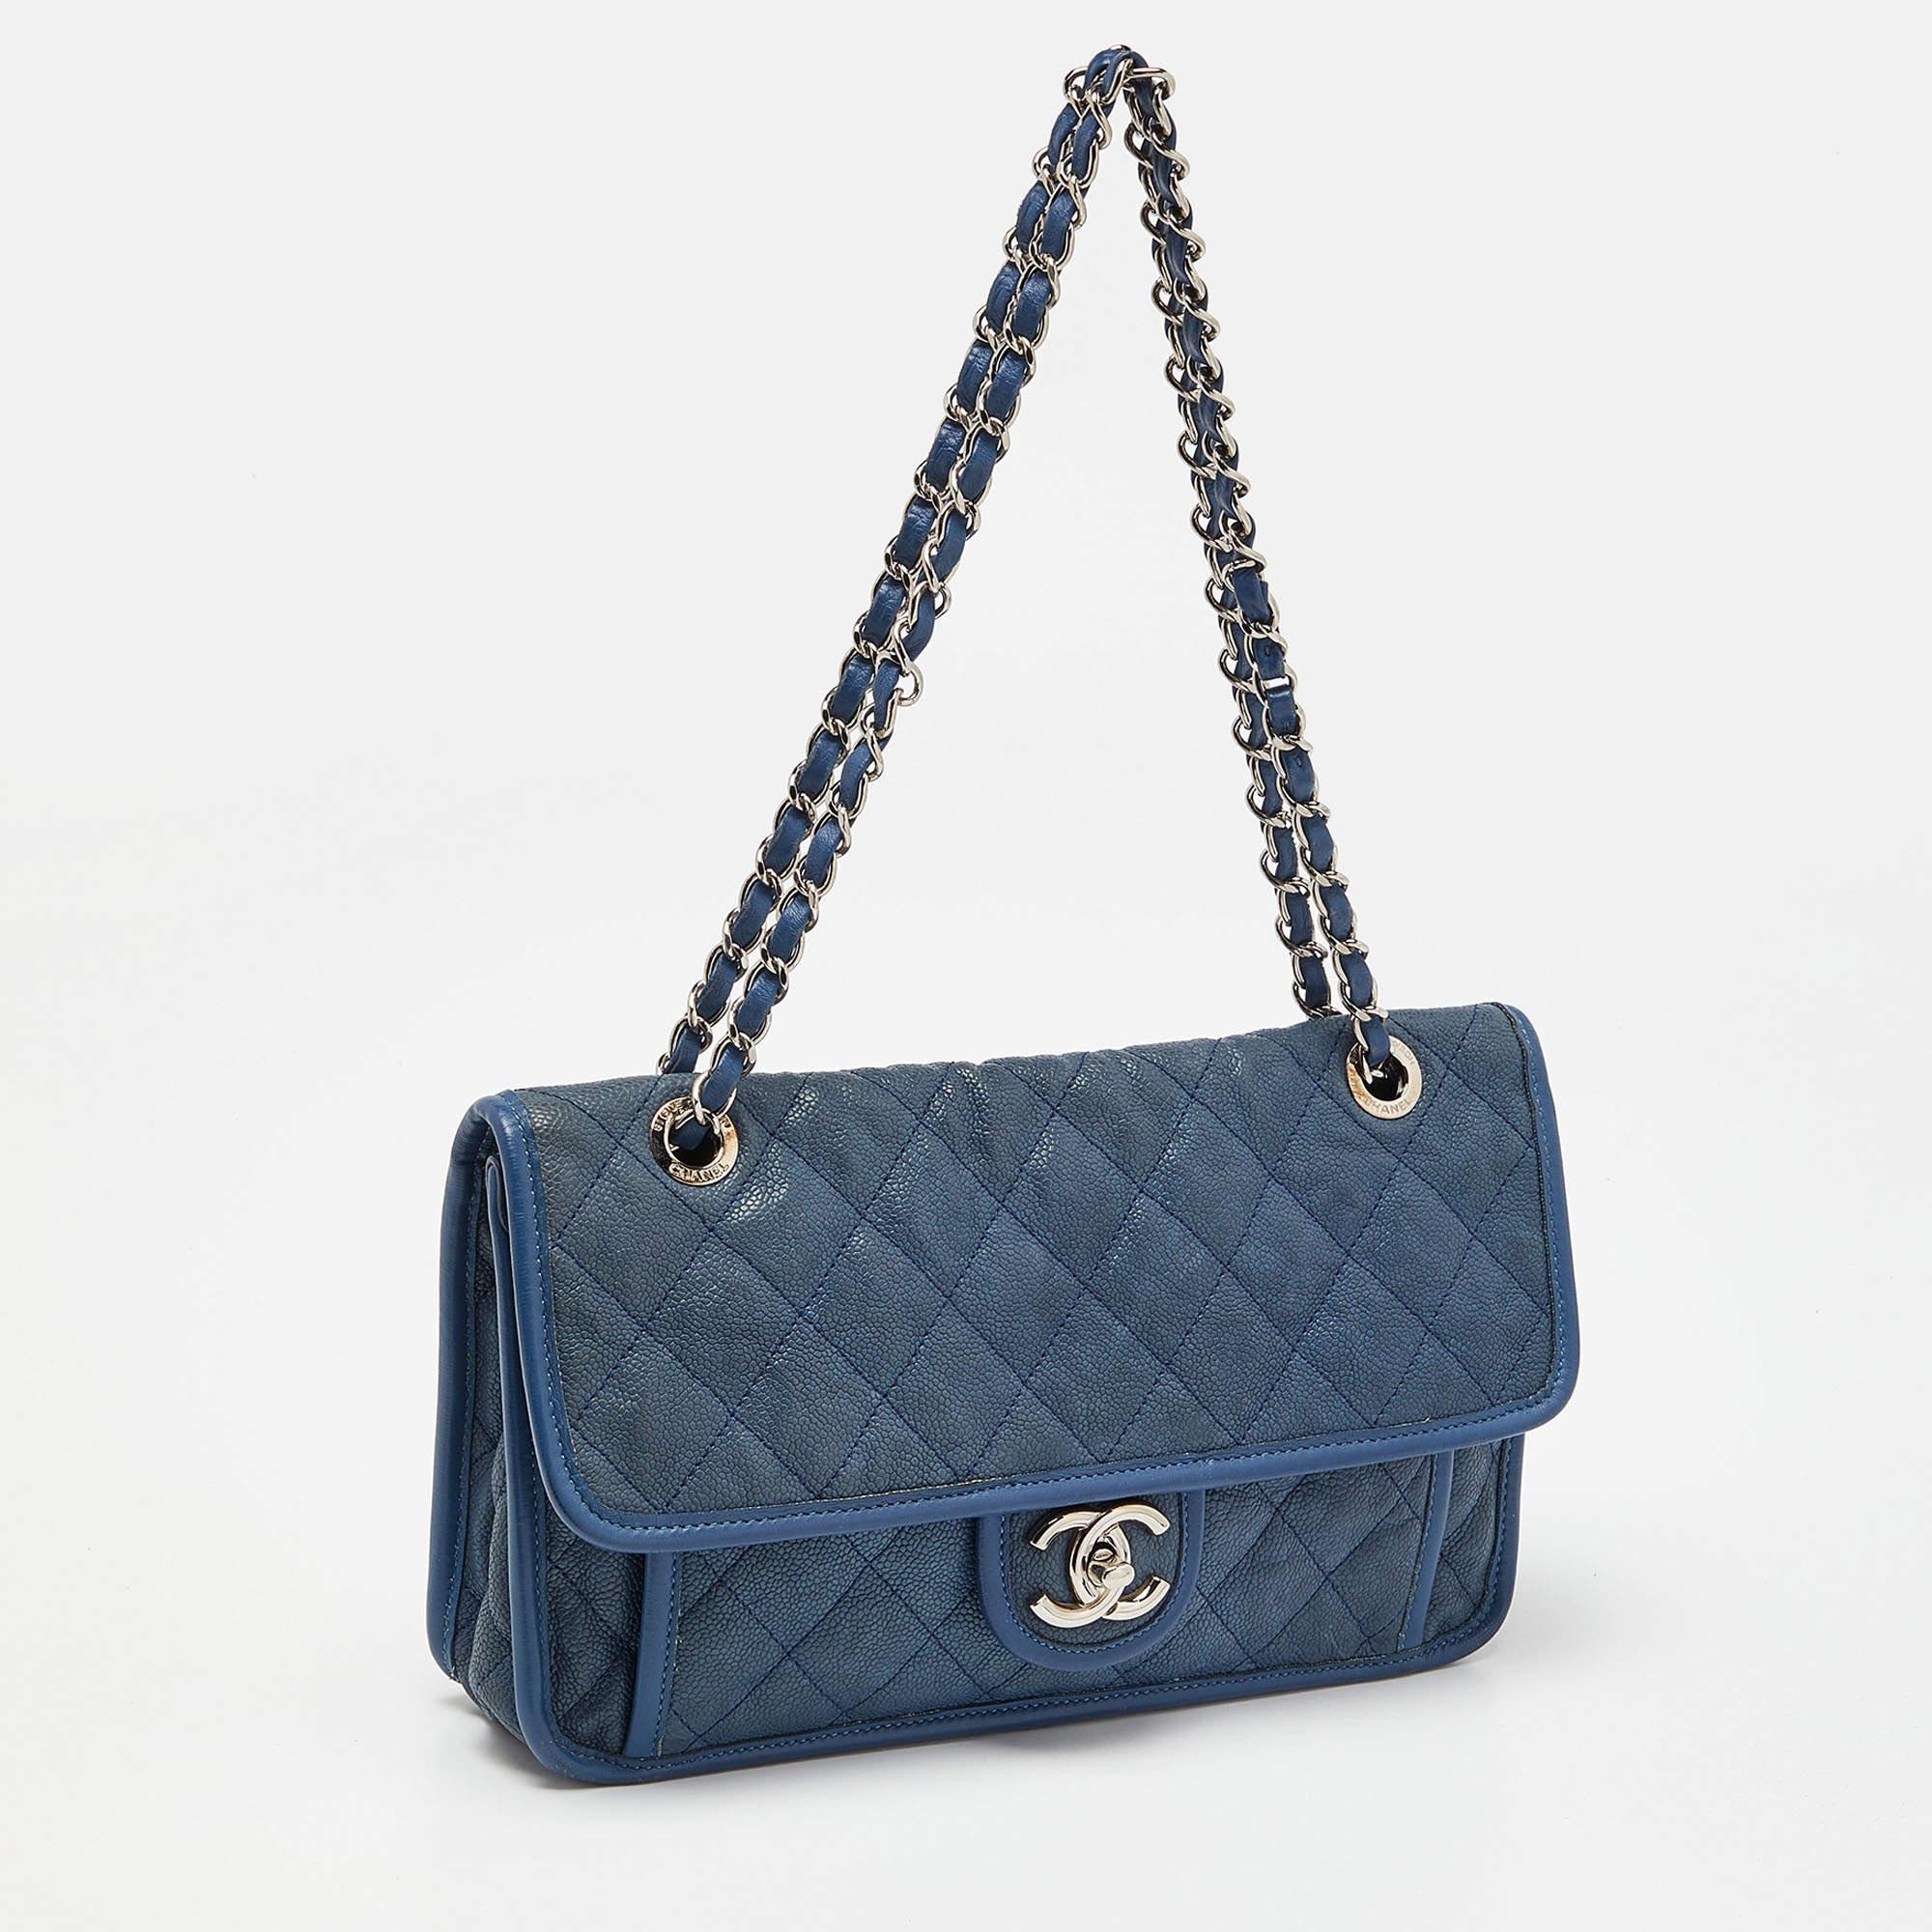 Chanel Blue Quilted Caviar Leather CC French Riviera Flap Bag In Fair Condition For Sale In Dubai, Al Qouz 2